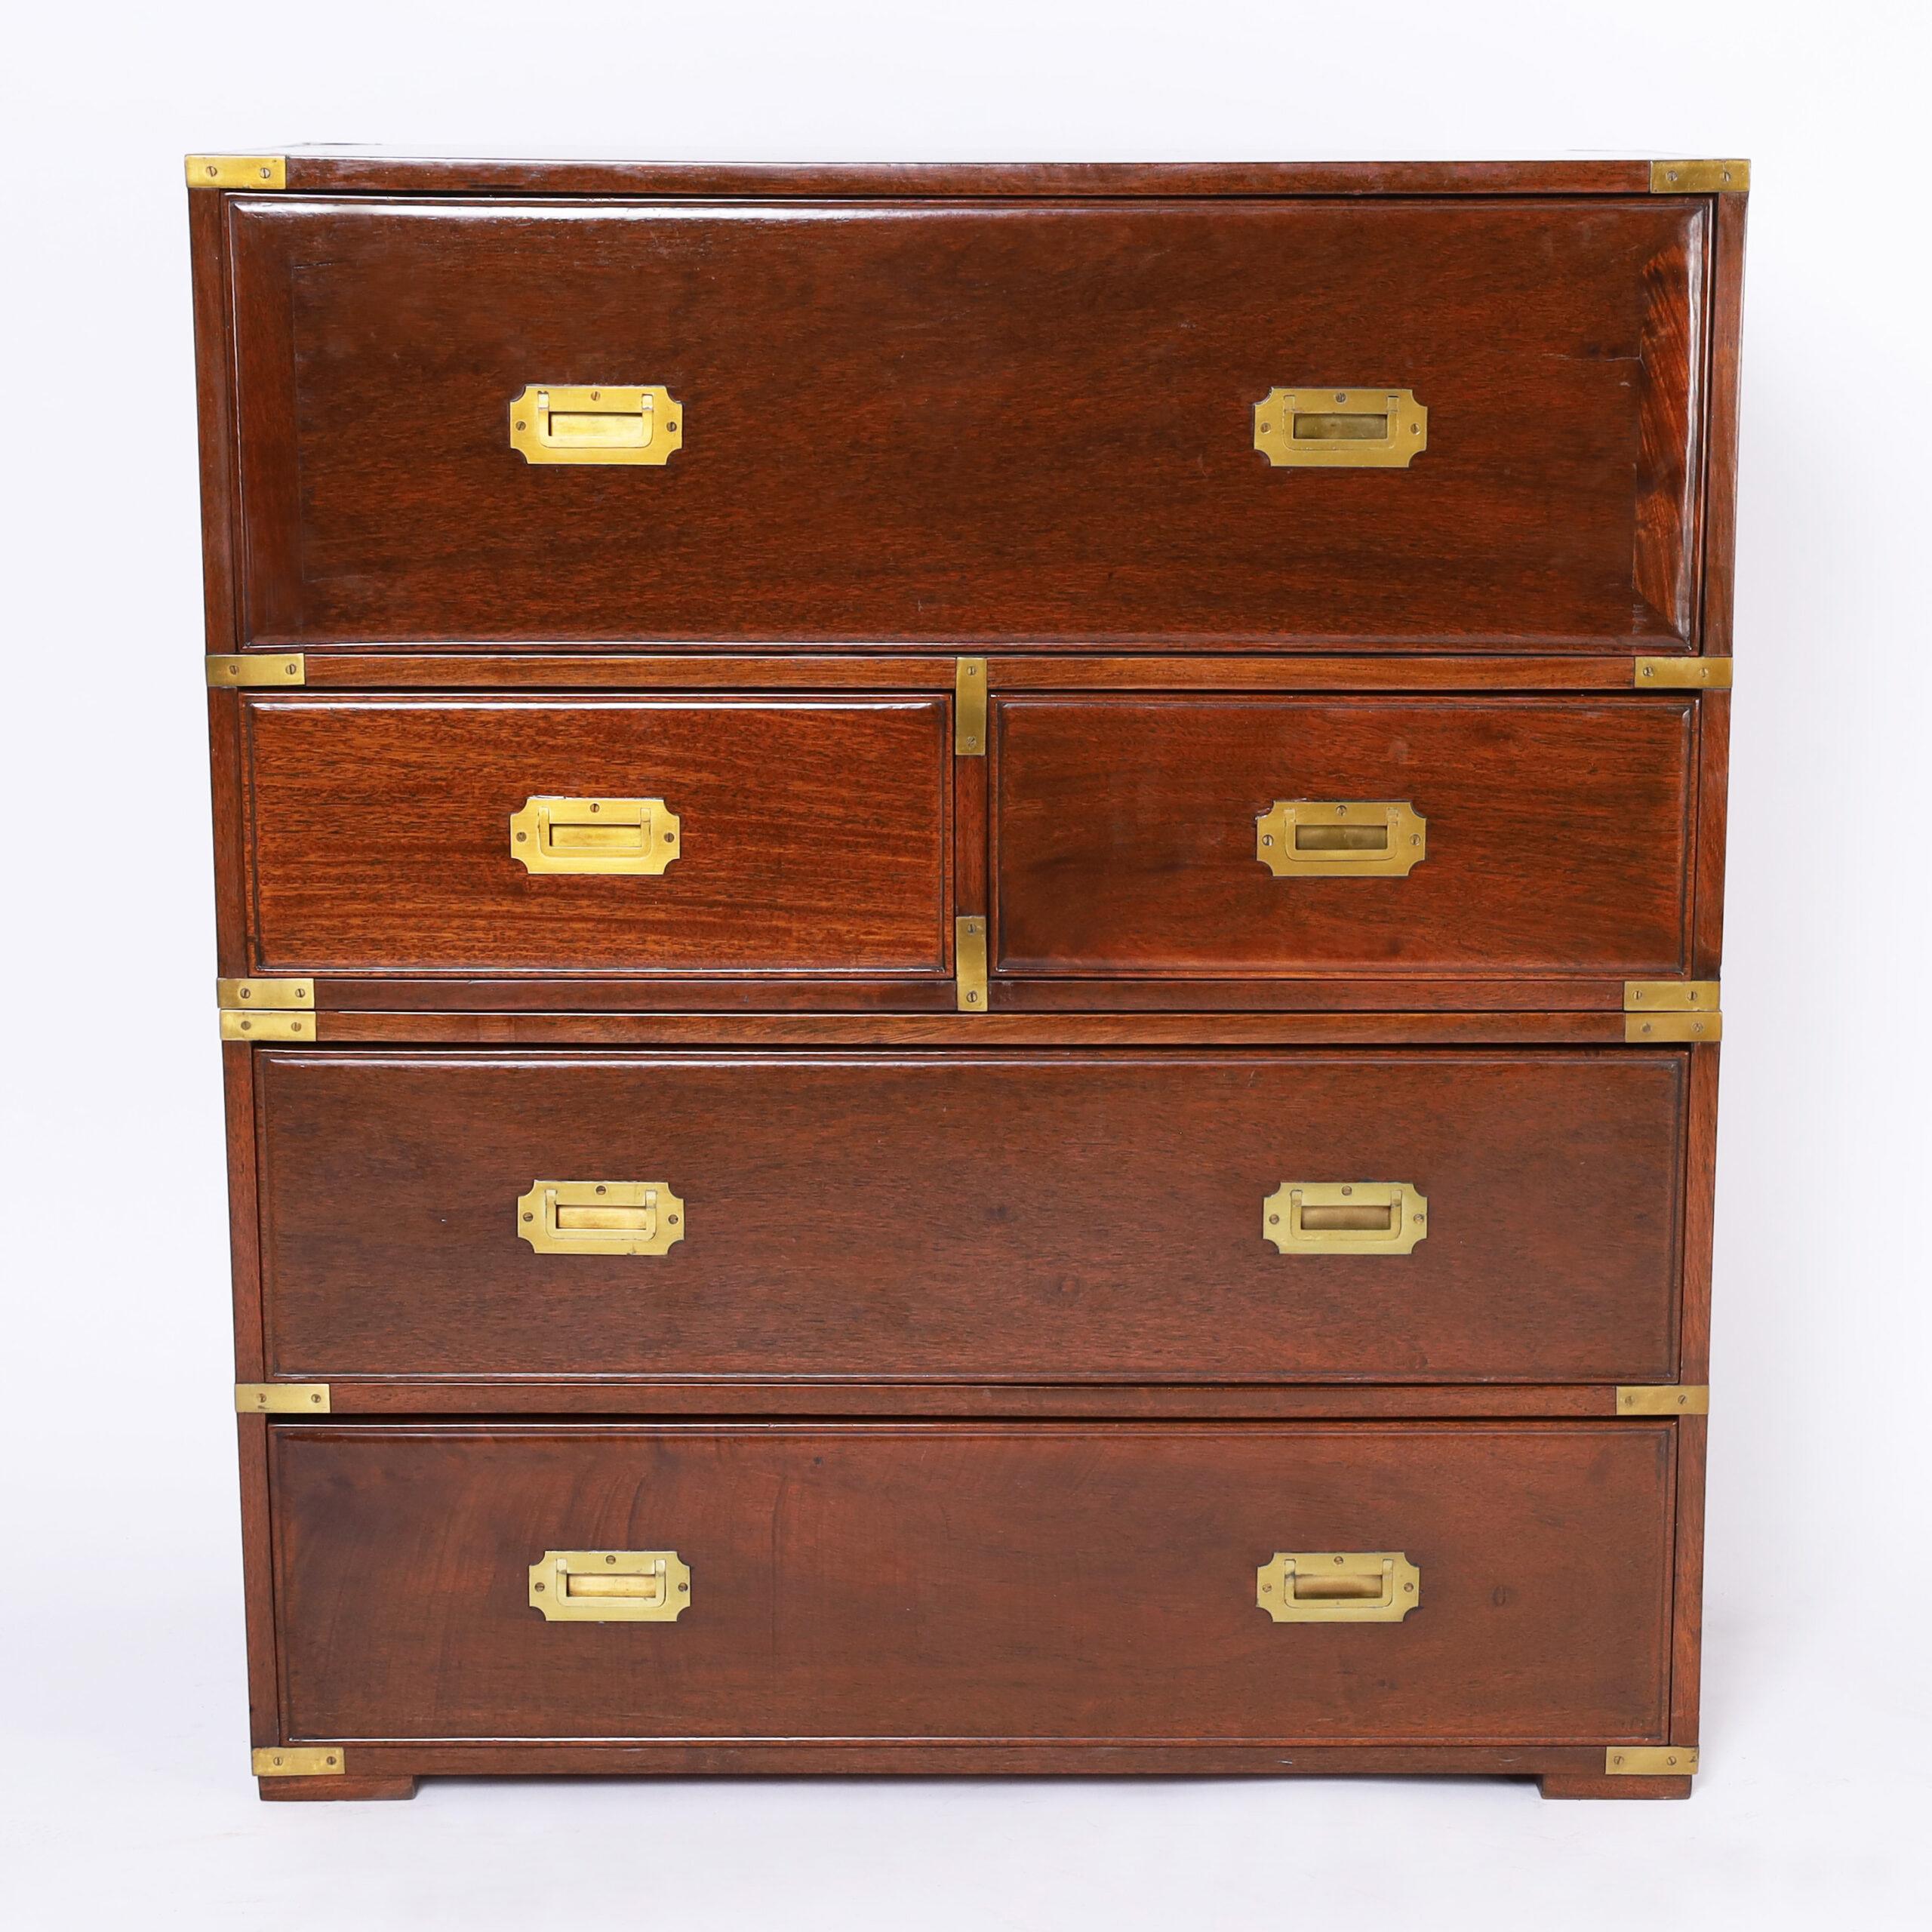 Impressive antique British Colonial Chinese campaign chest crafted in teak wood in two piece construction with brass hardware, featuring a unique pullout desk ambitiously crafted with nooks and drawers above four drawers on block feet.